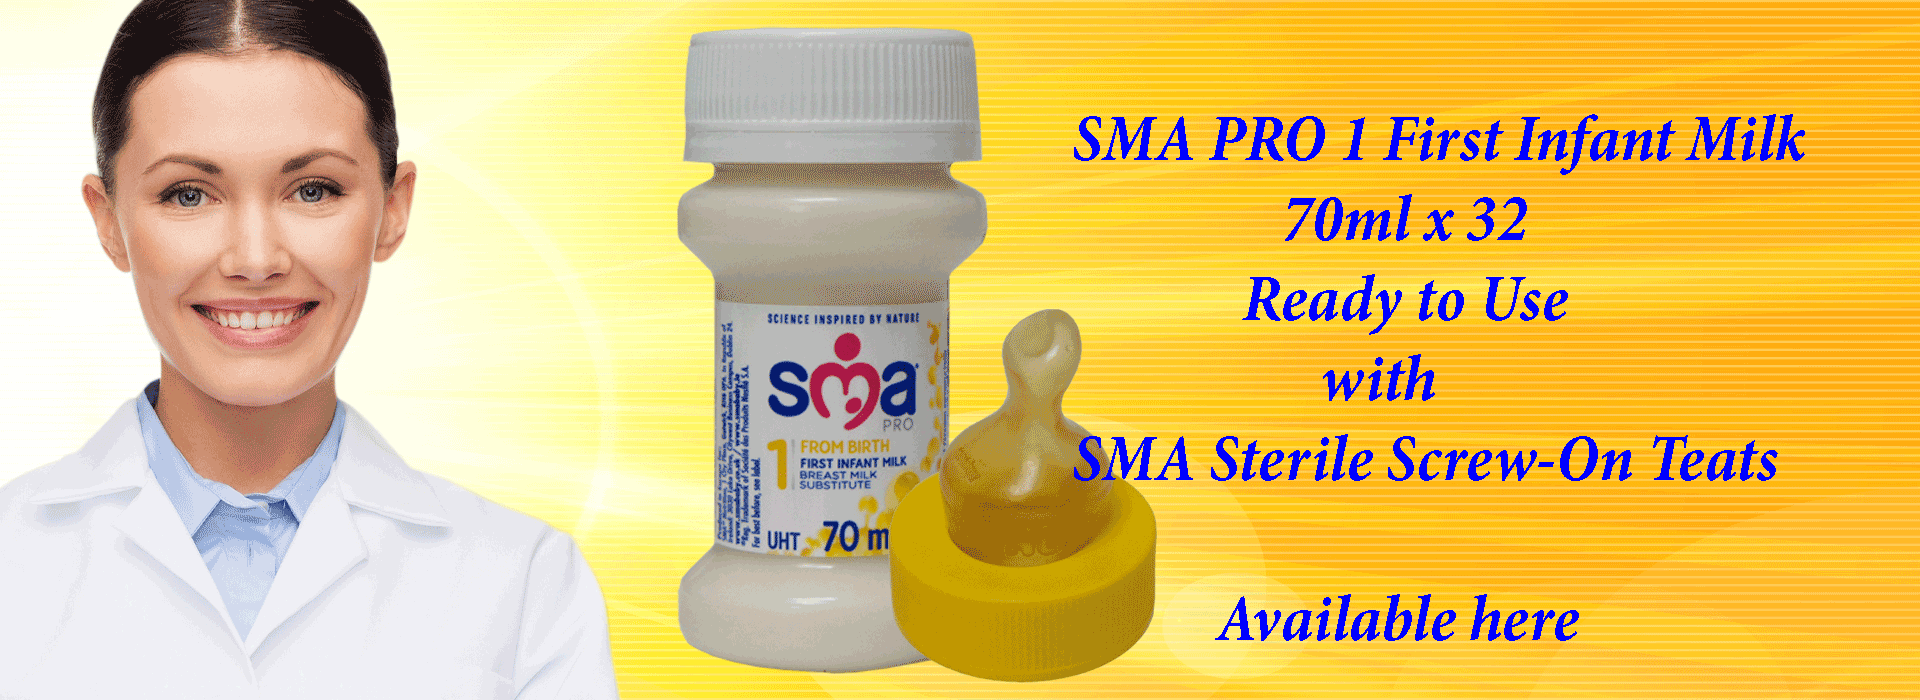 sma pro ready to use milk with sma teats available here